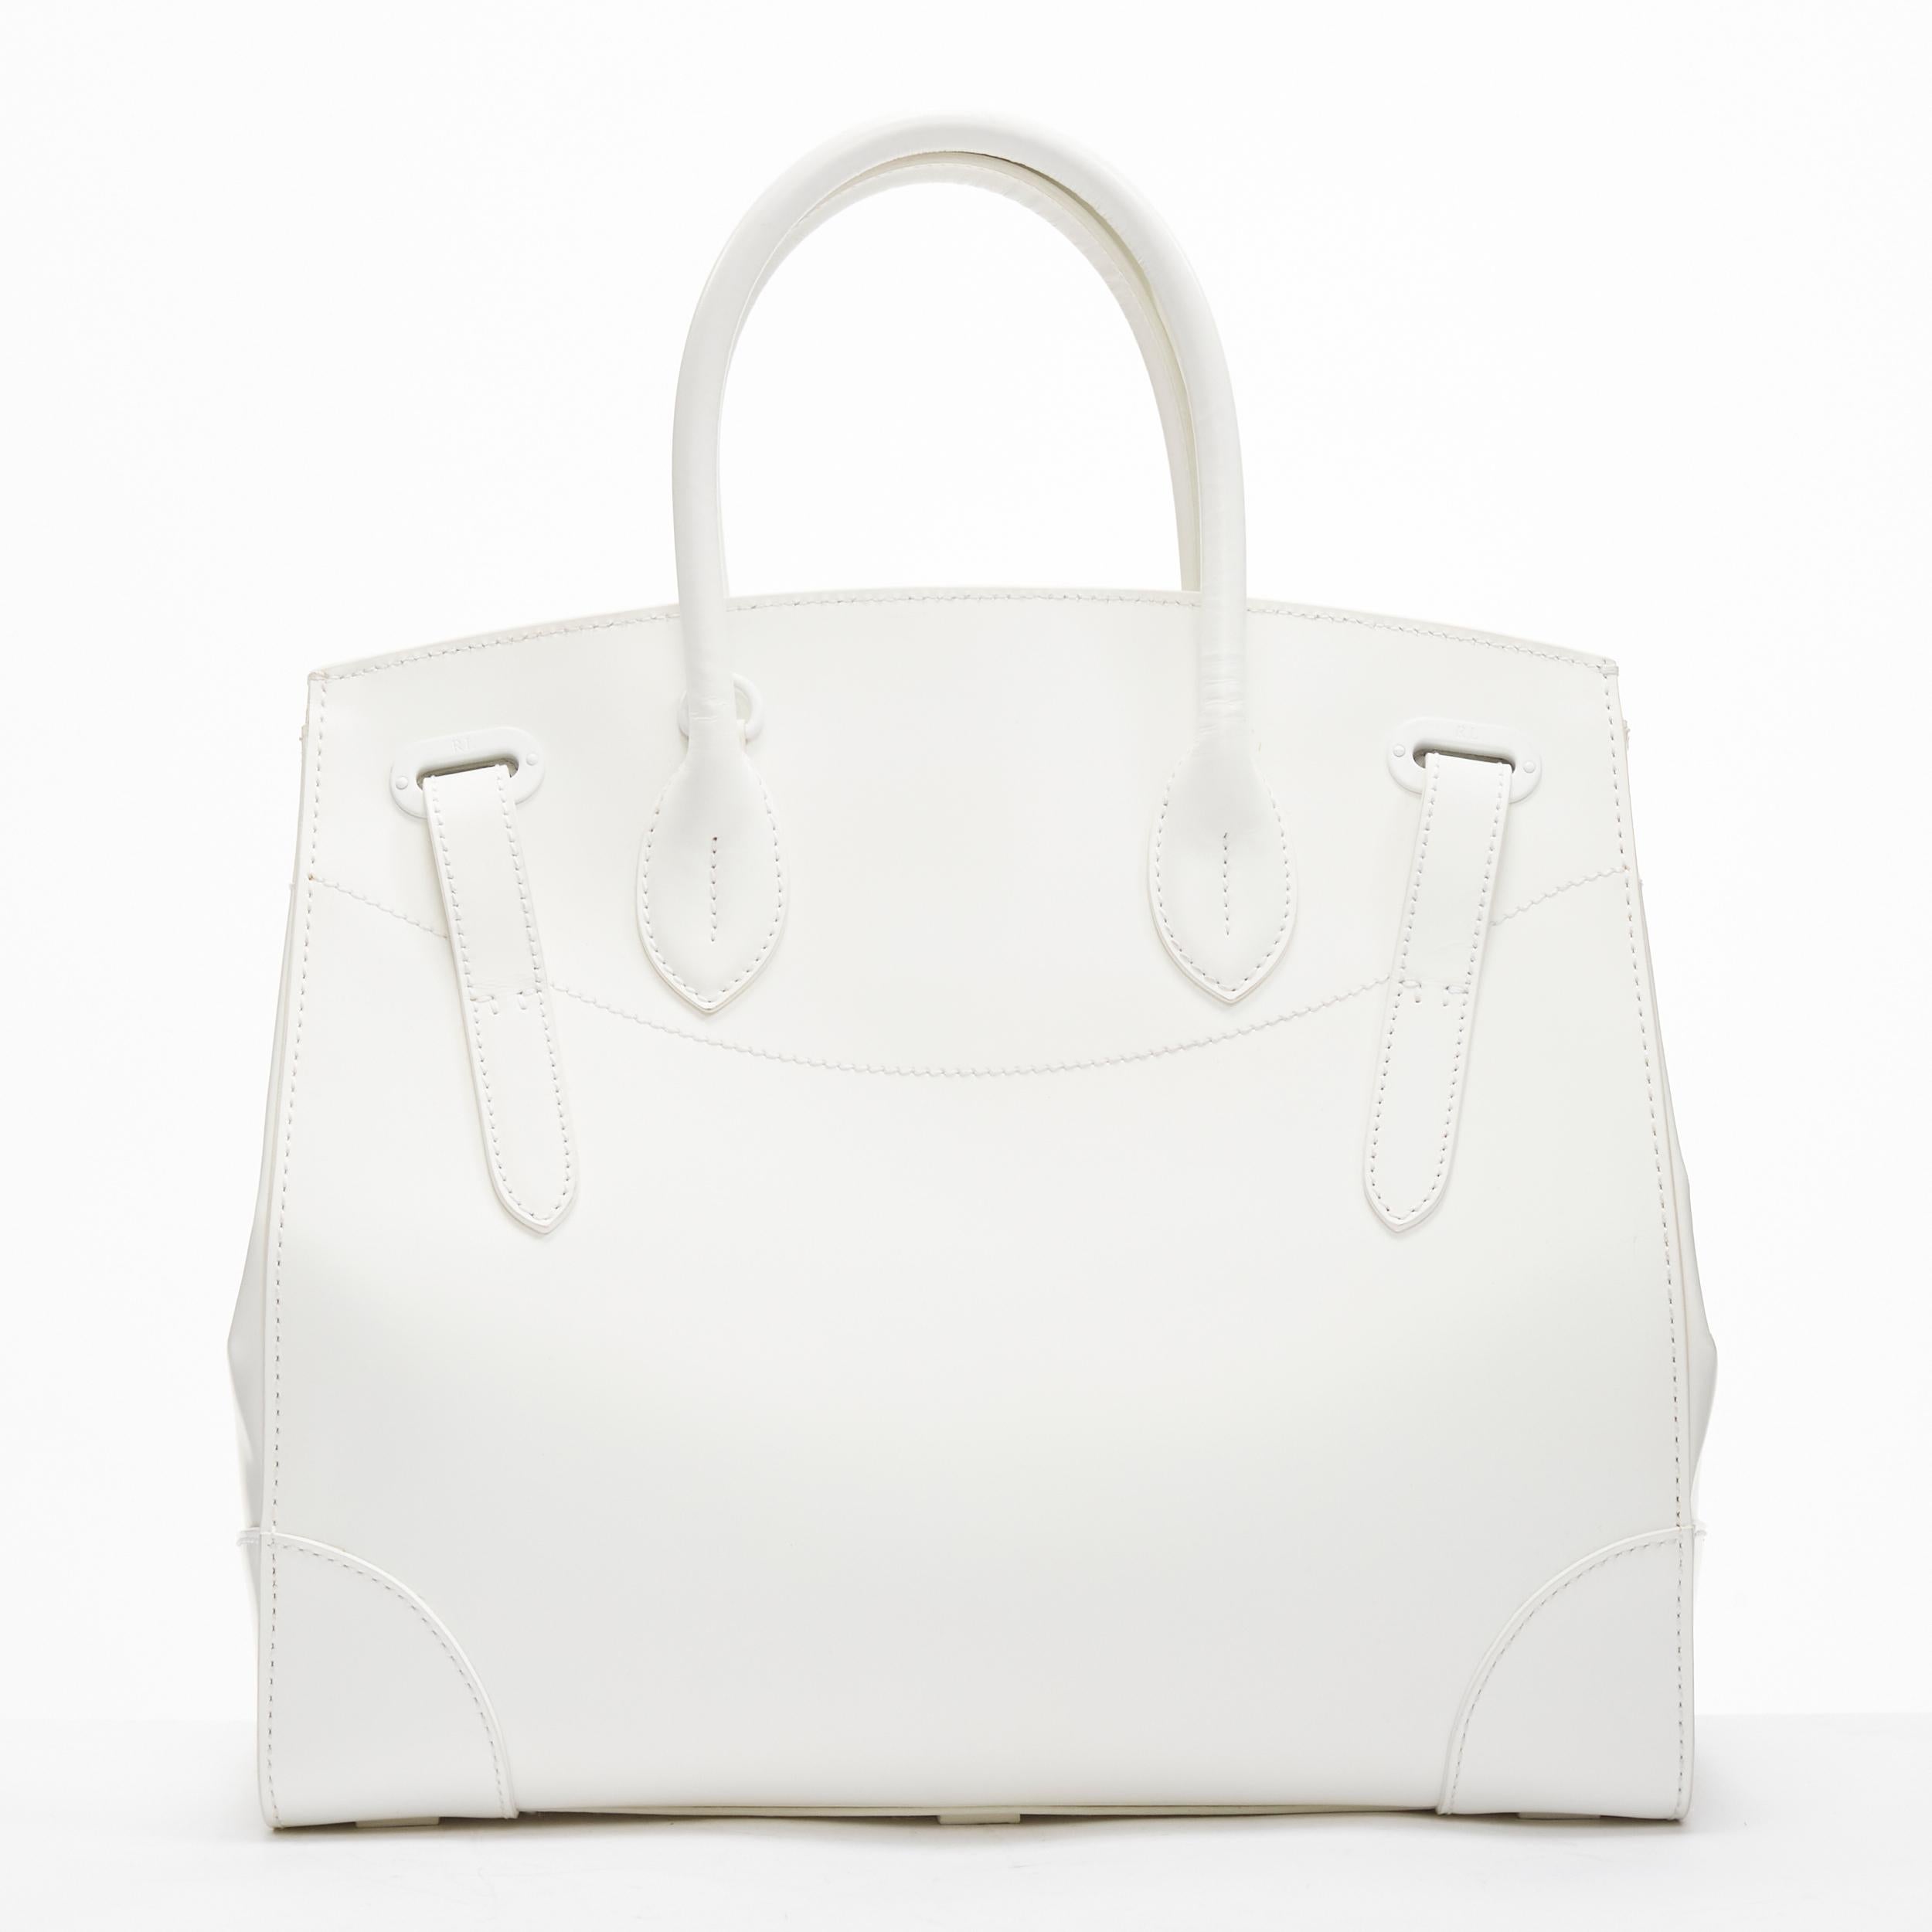 RALPH LAUREN Ricky white smooth leather tonal buckles top handle bag 1